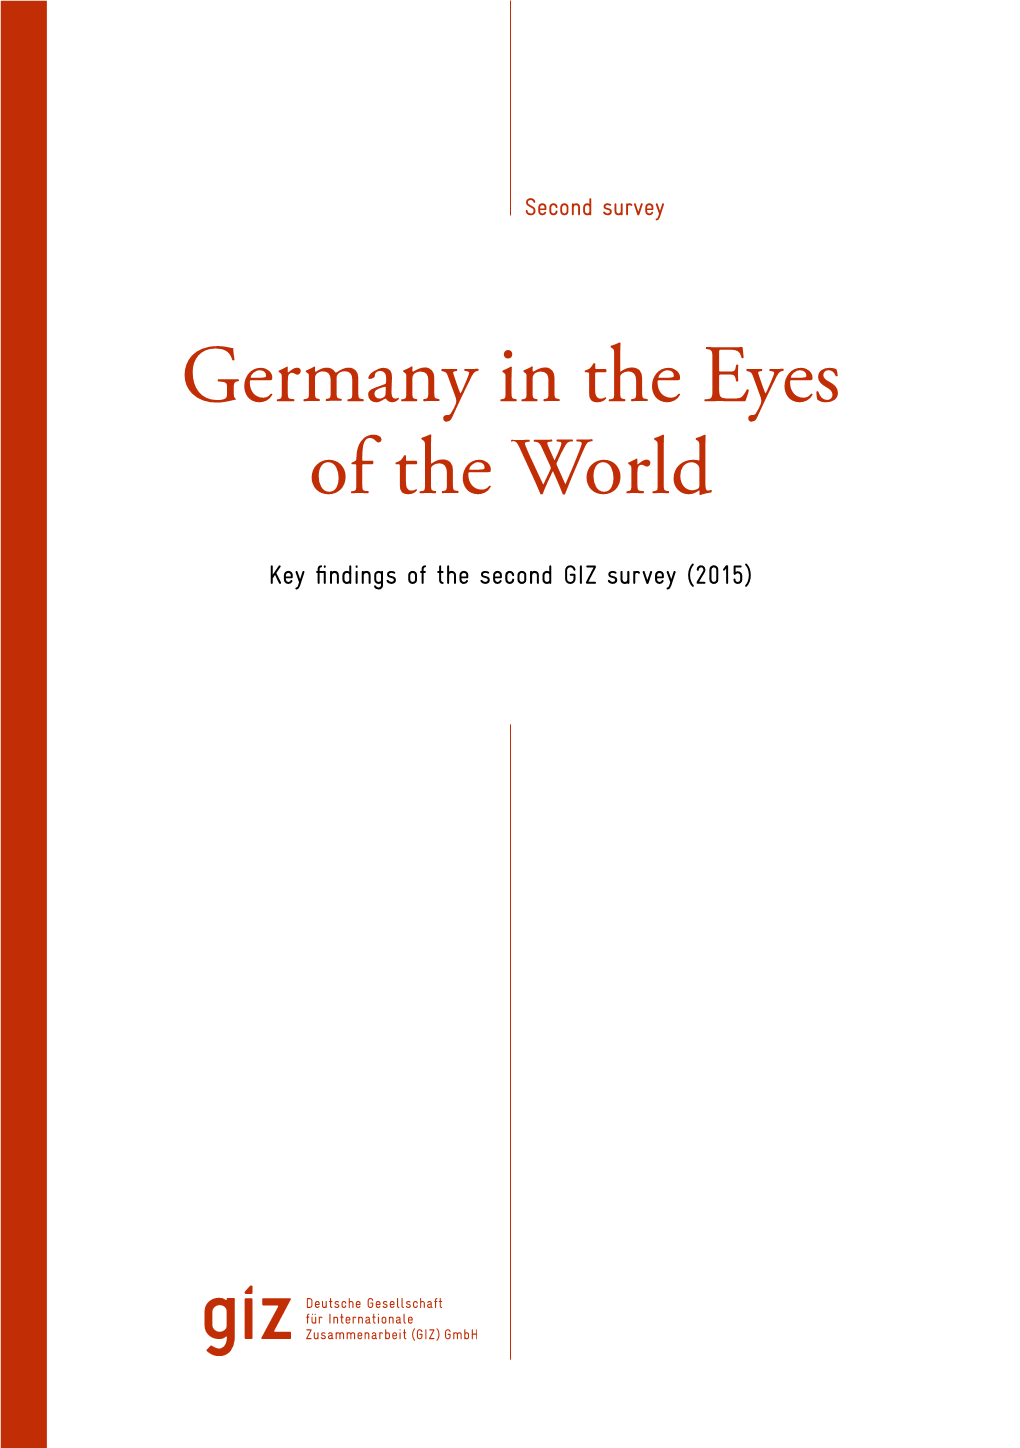 Germany in the Eyes of the World